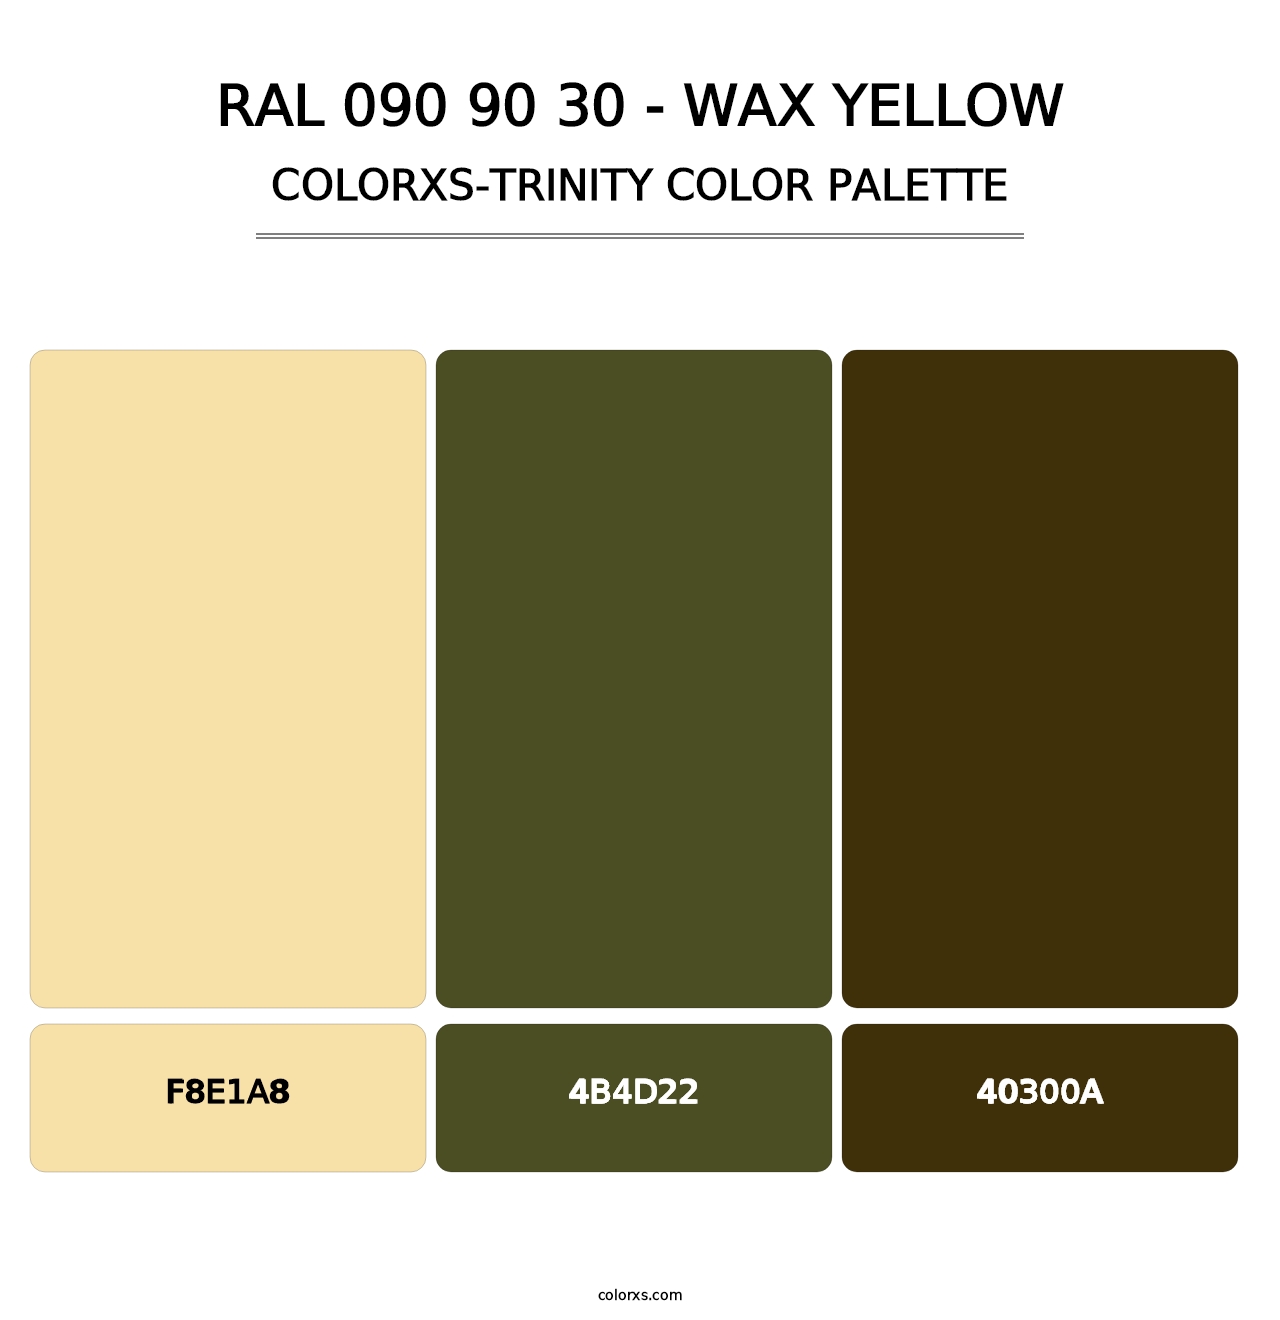 RAL 090 90 30 - Wax Yellow - Colorxs Trinity Palette